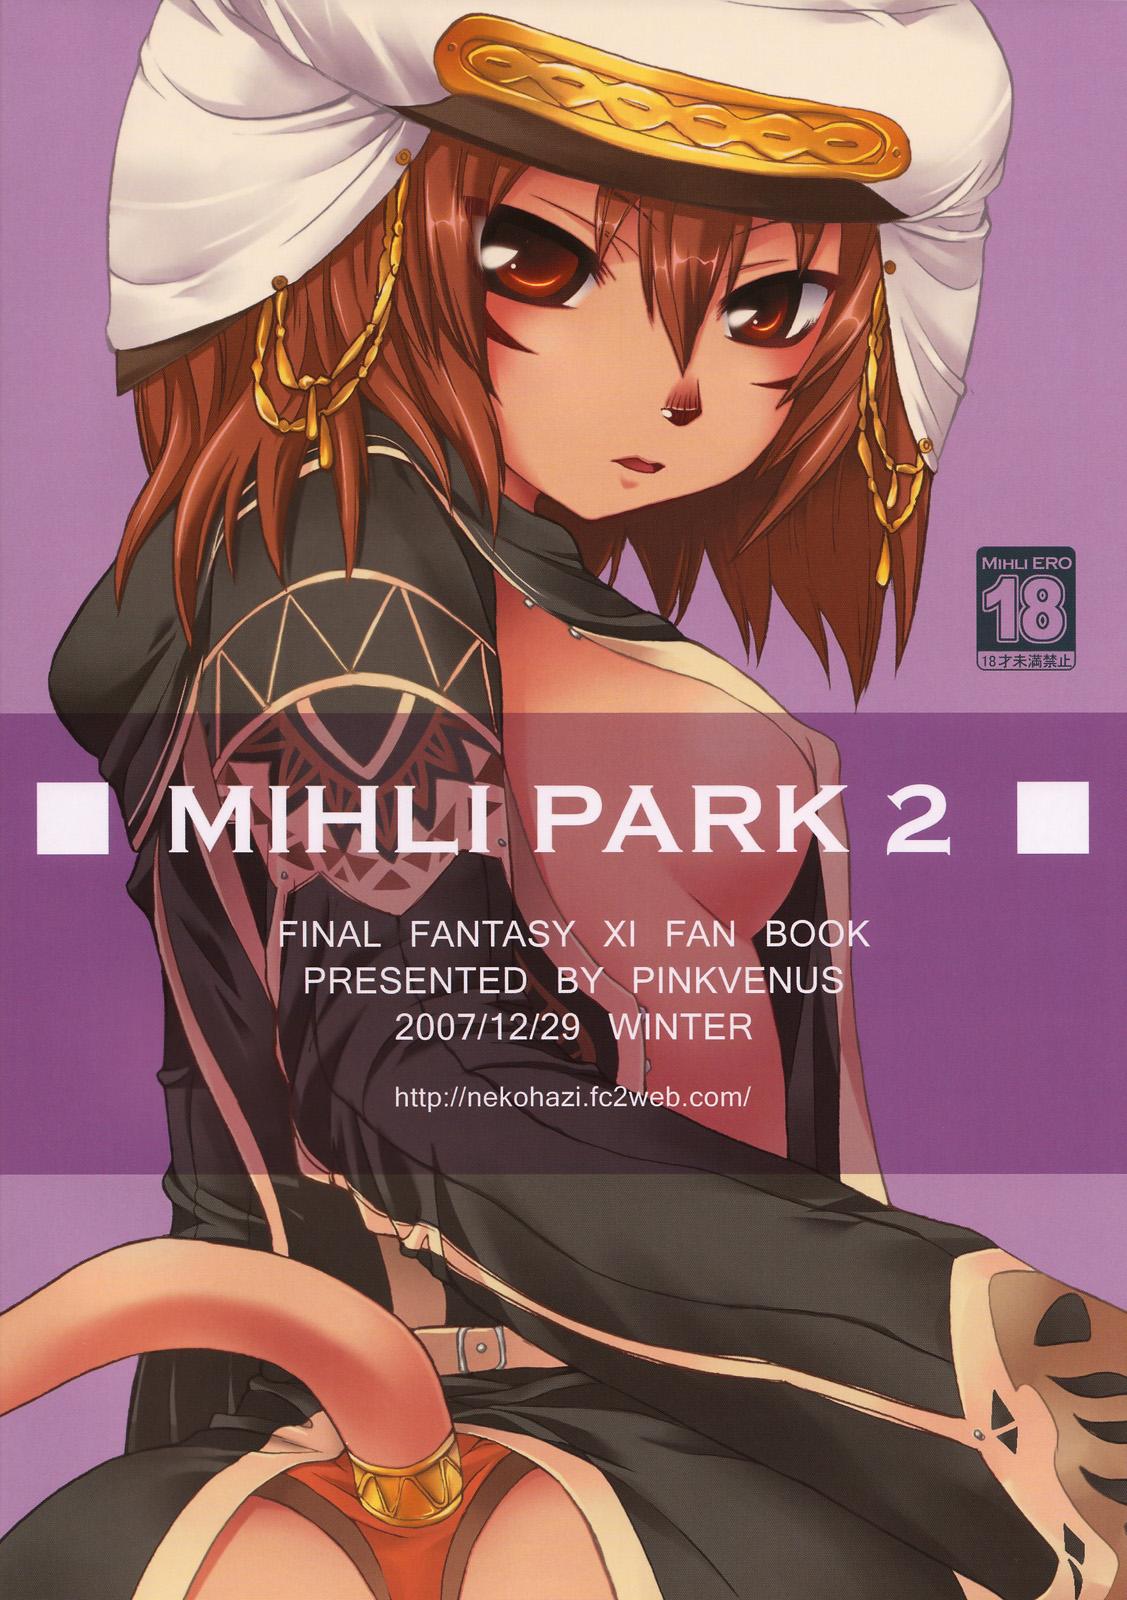 Nasty Mihli Park 2 - Final fantasy xi Hairypussy - Page 22